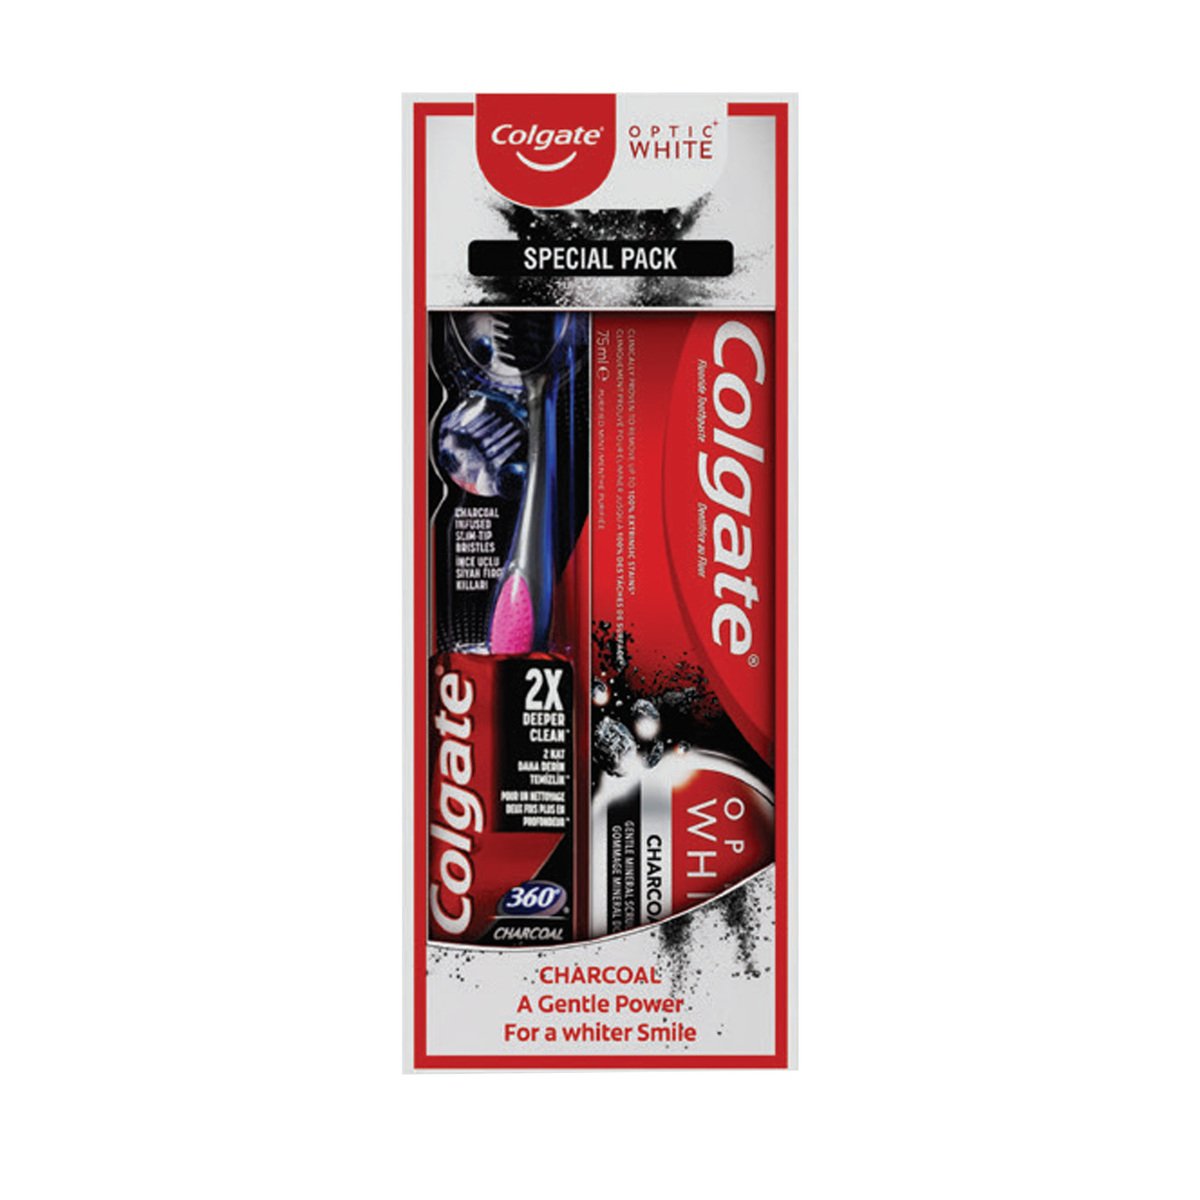 Colgate Optic White Charcoal Toothpaste 75 ml + Toothbrush 1 pc